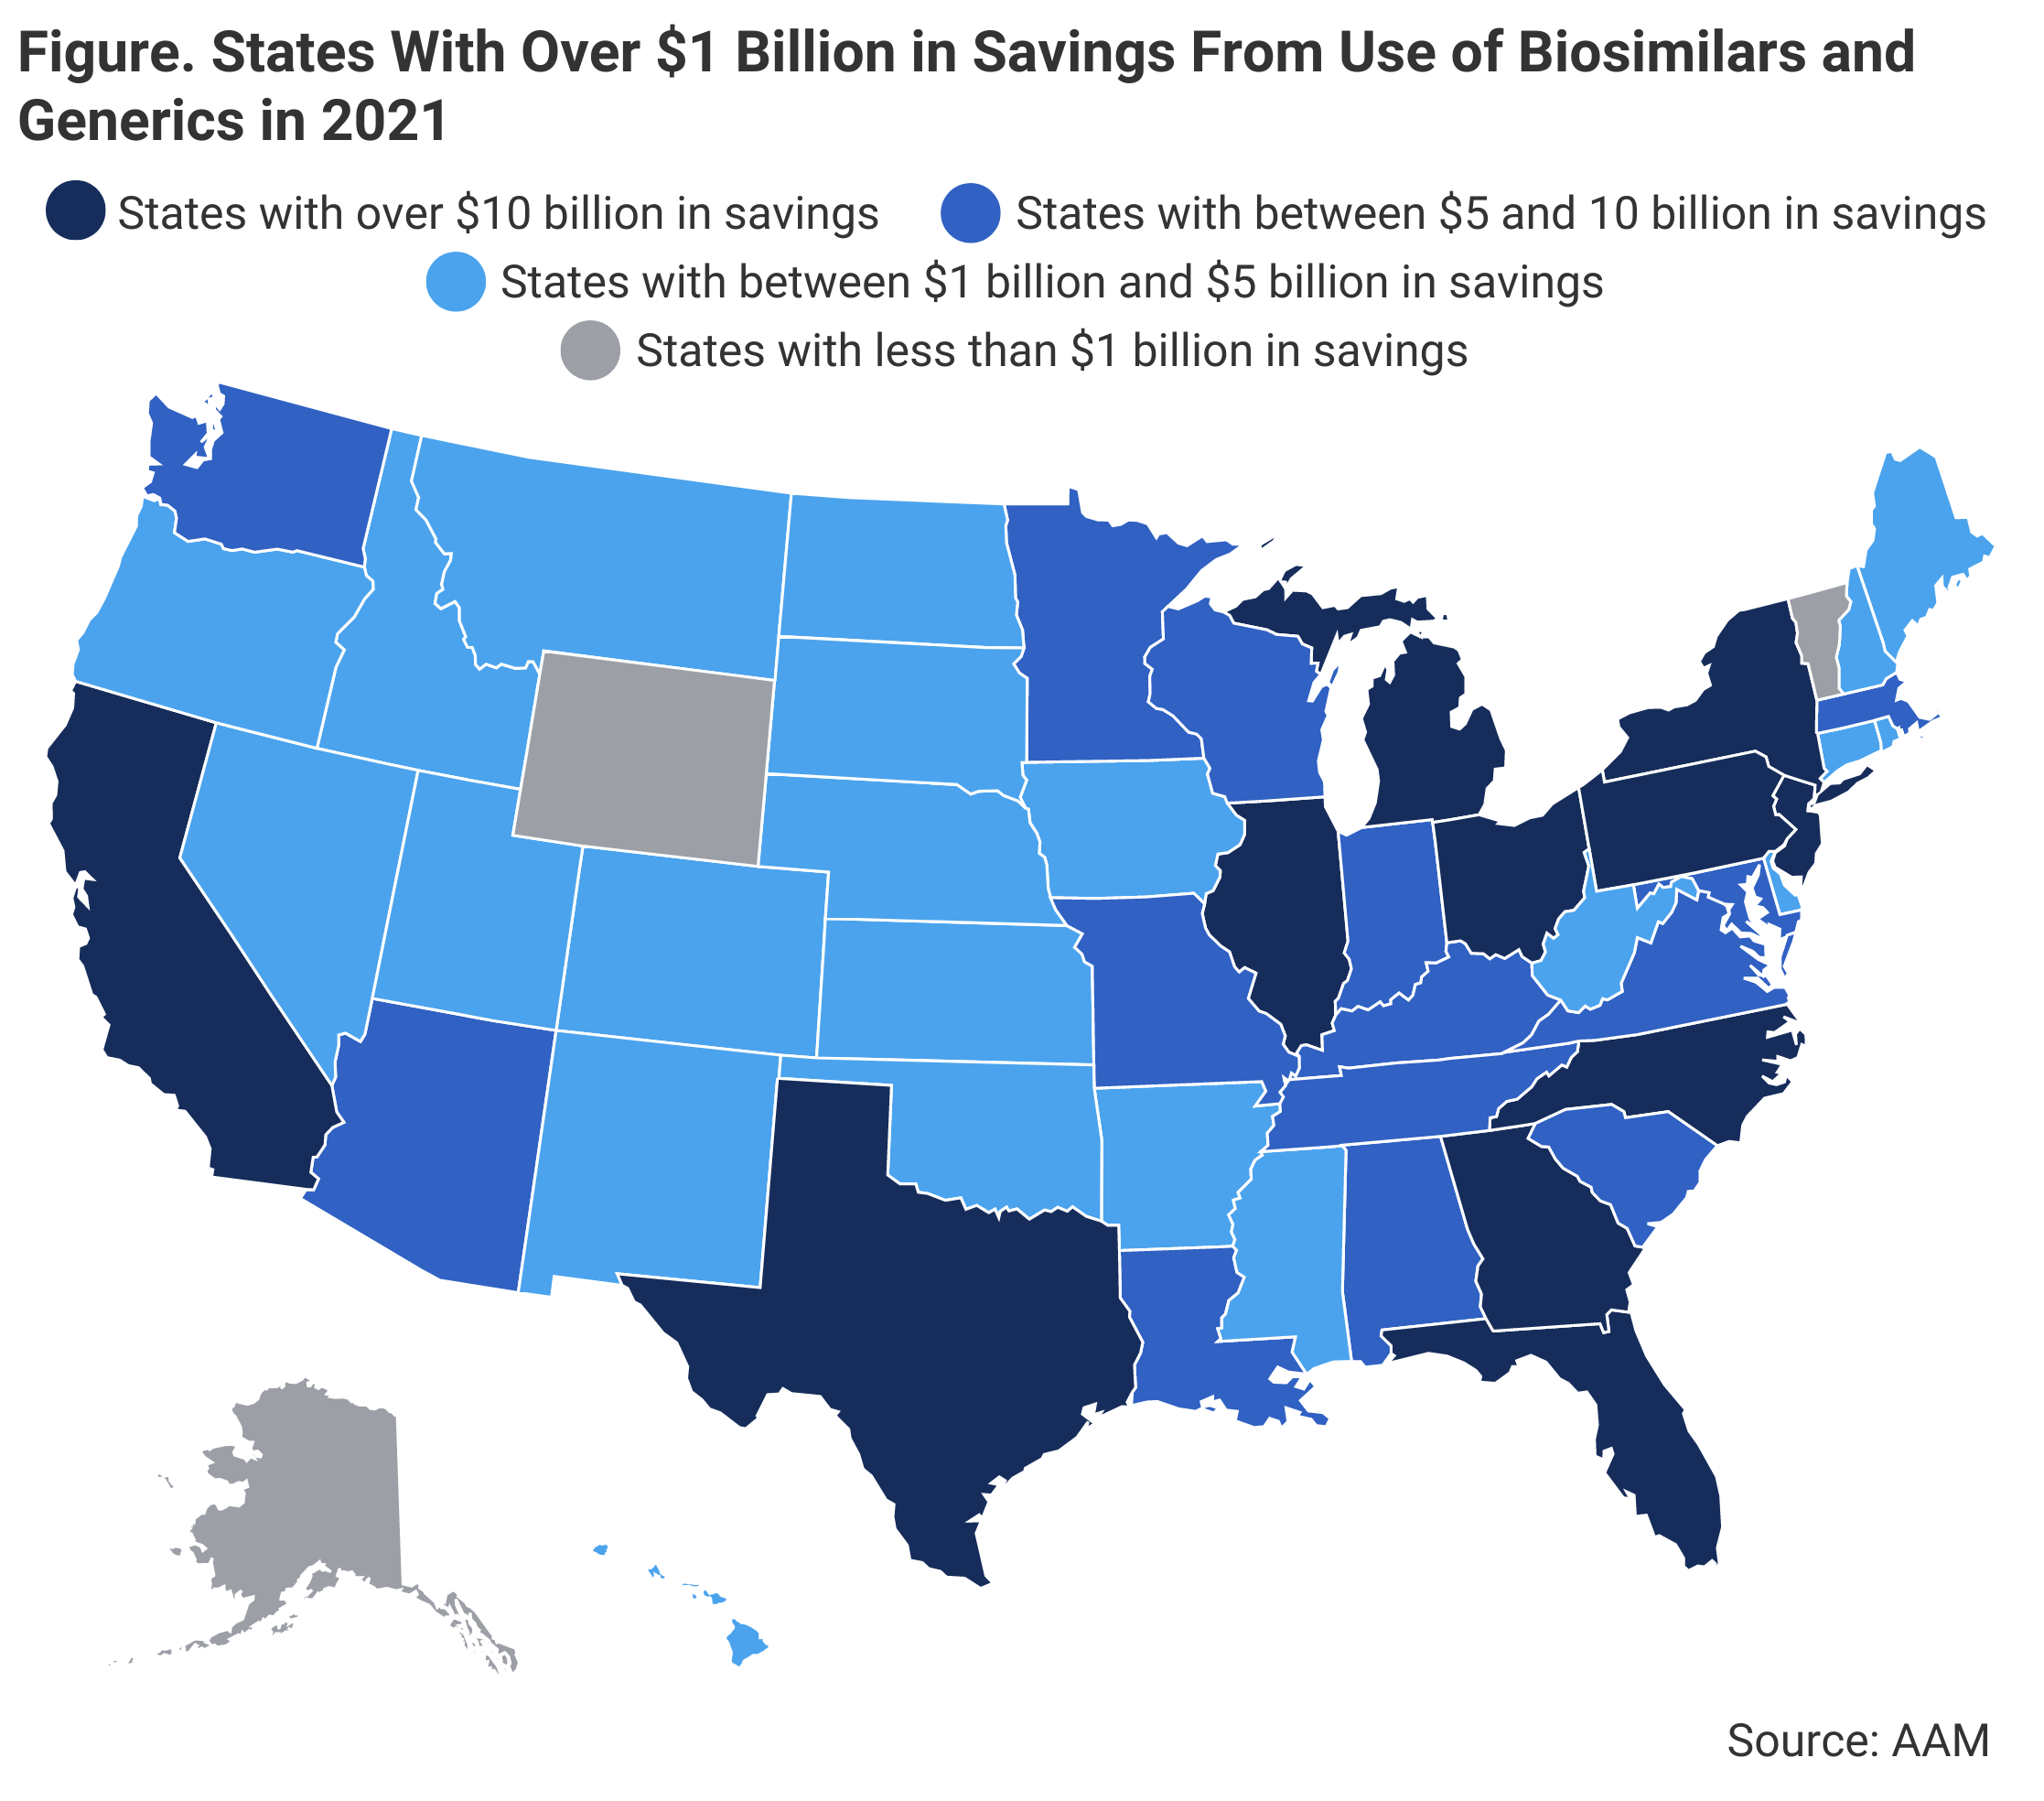 A map of the United States showing the states that have saved over $10 billion or had a high per capita savings from using generic or biosimilar drugs in 2021.